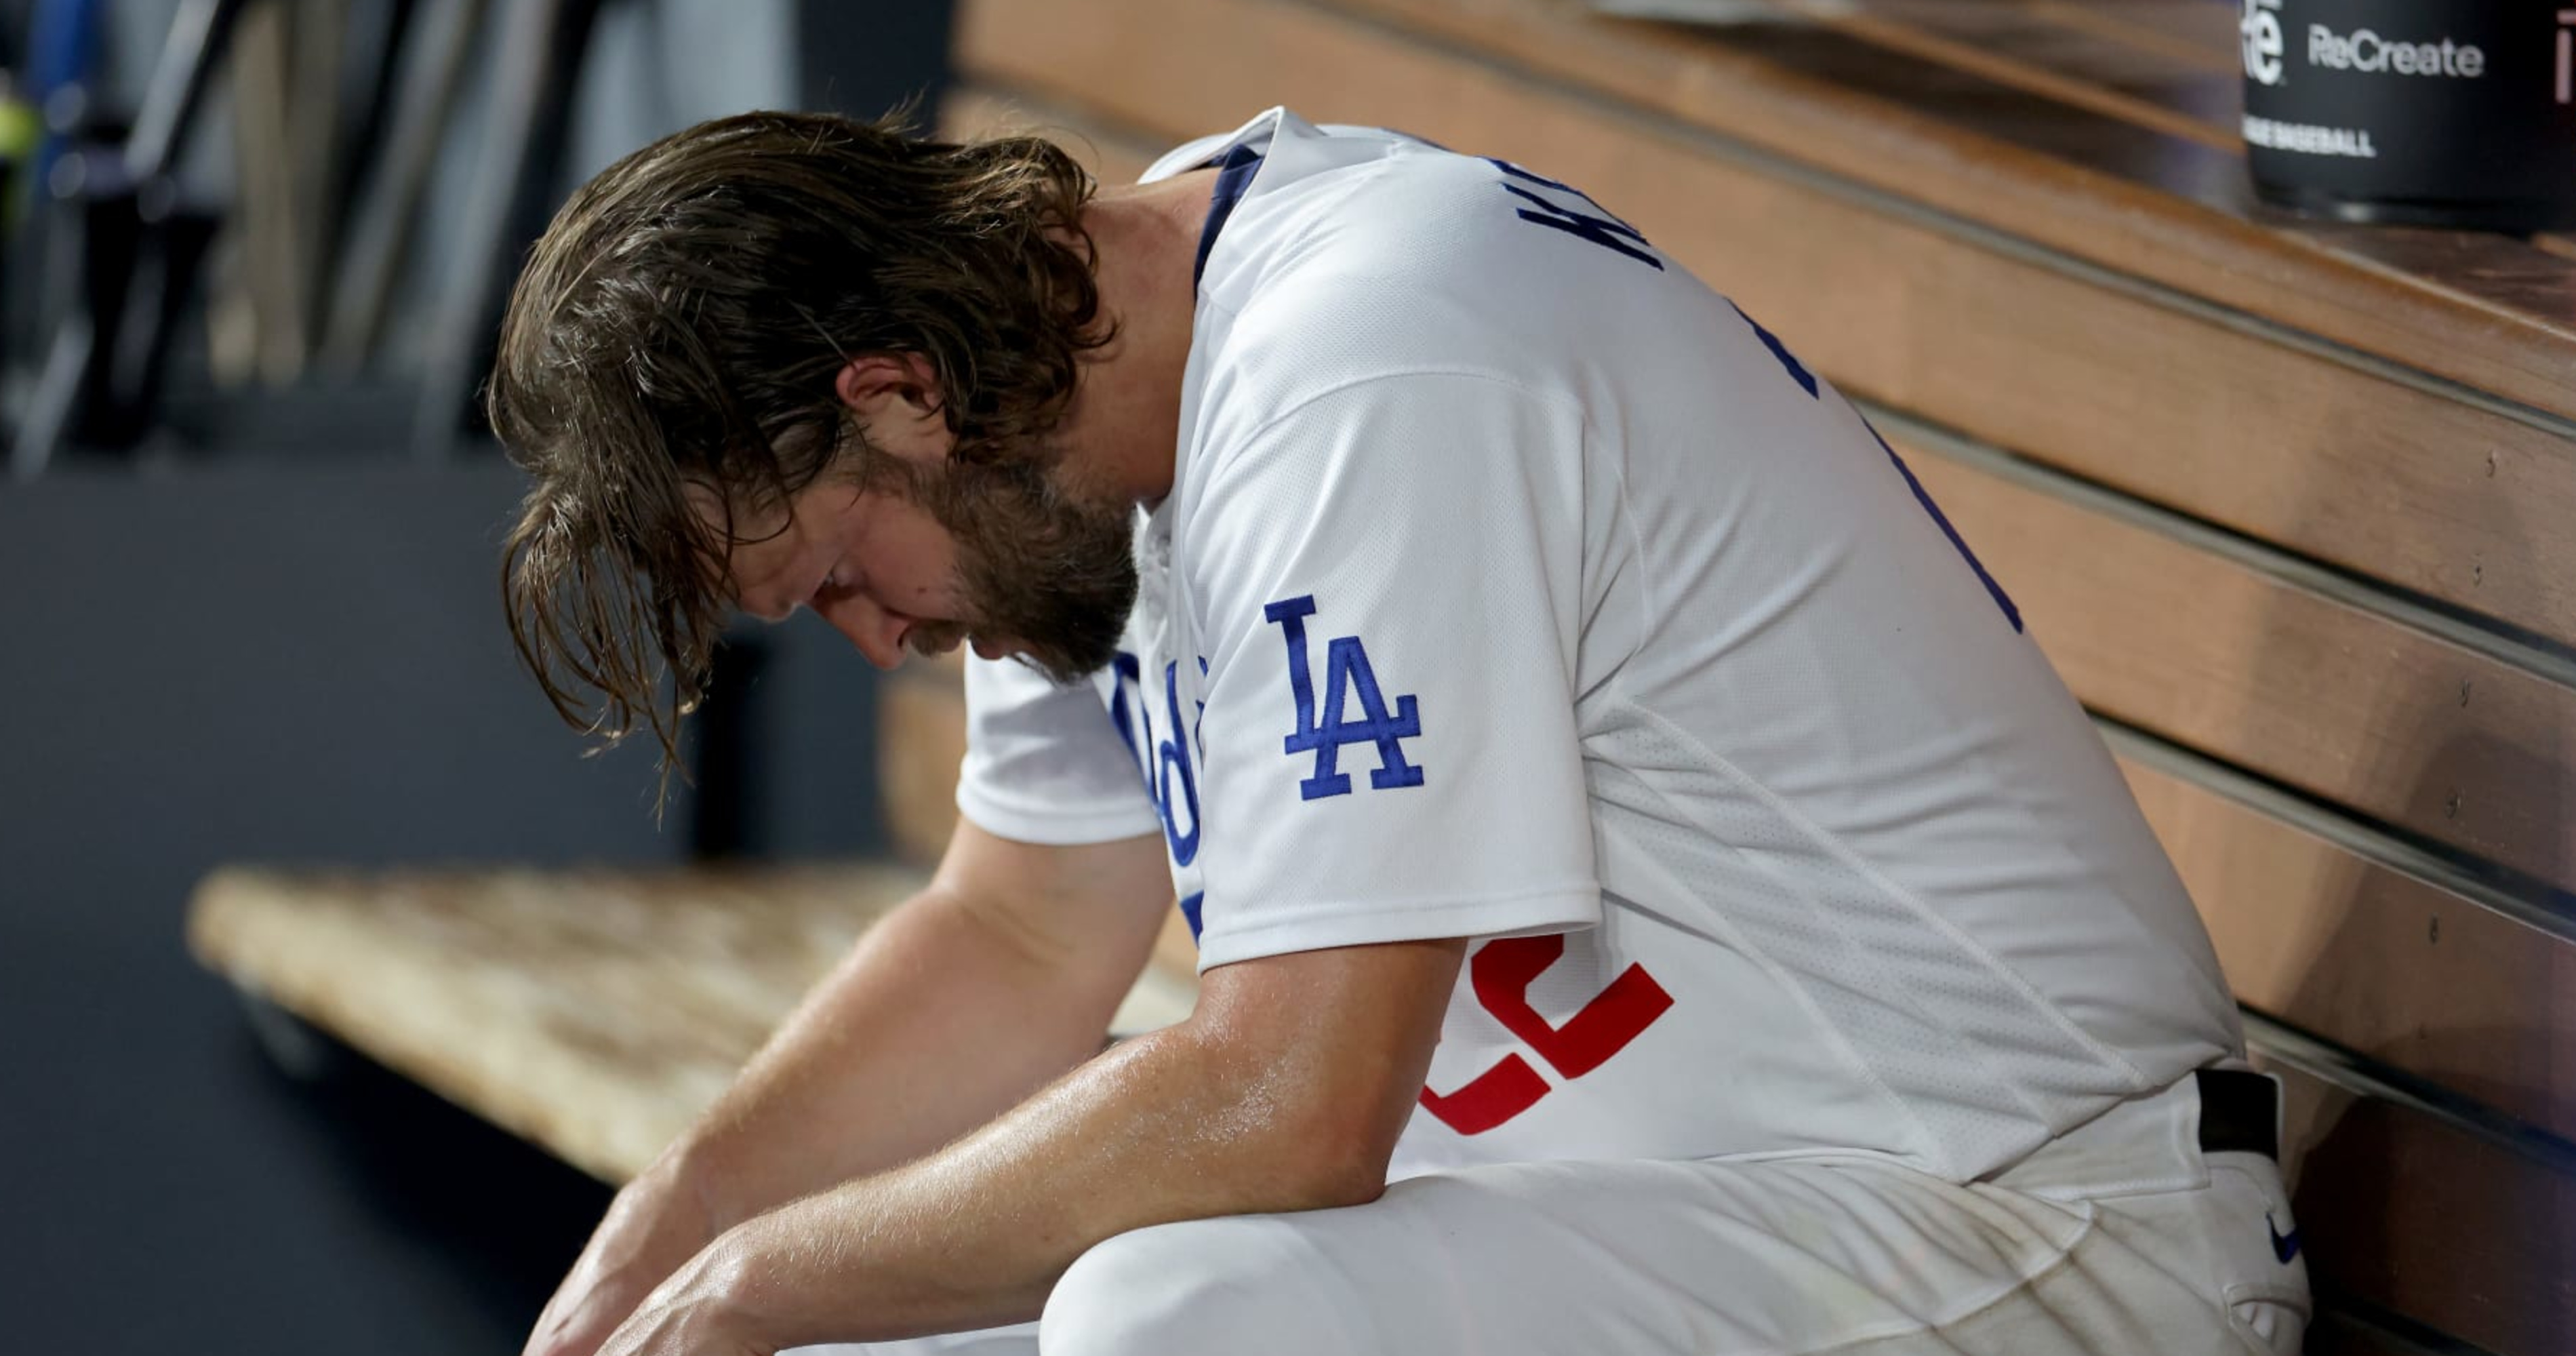 Dodgers' Kershaw has another chance to write his signature moment